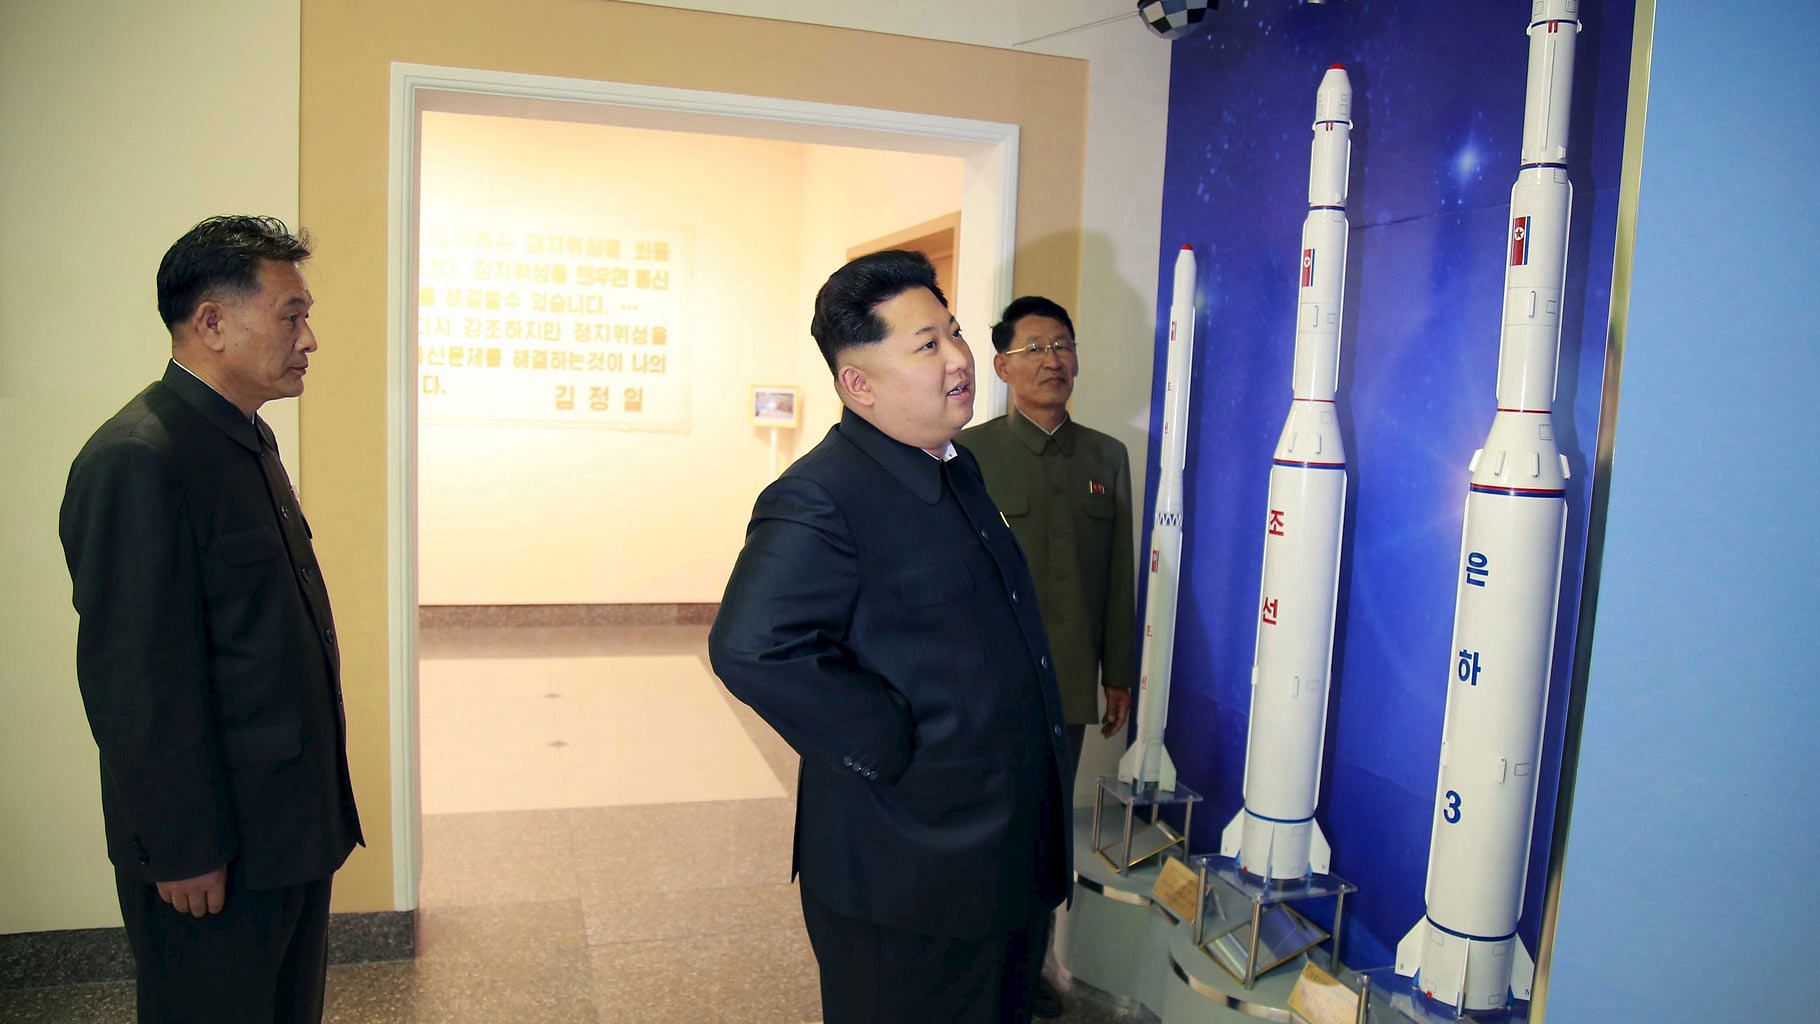  Kim Jong Un has been eyeing the expansion of N Korea’s nuclear capabilities in recent times.&nbsp;